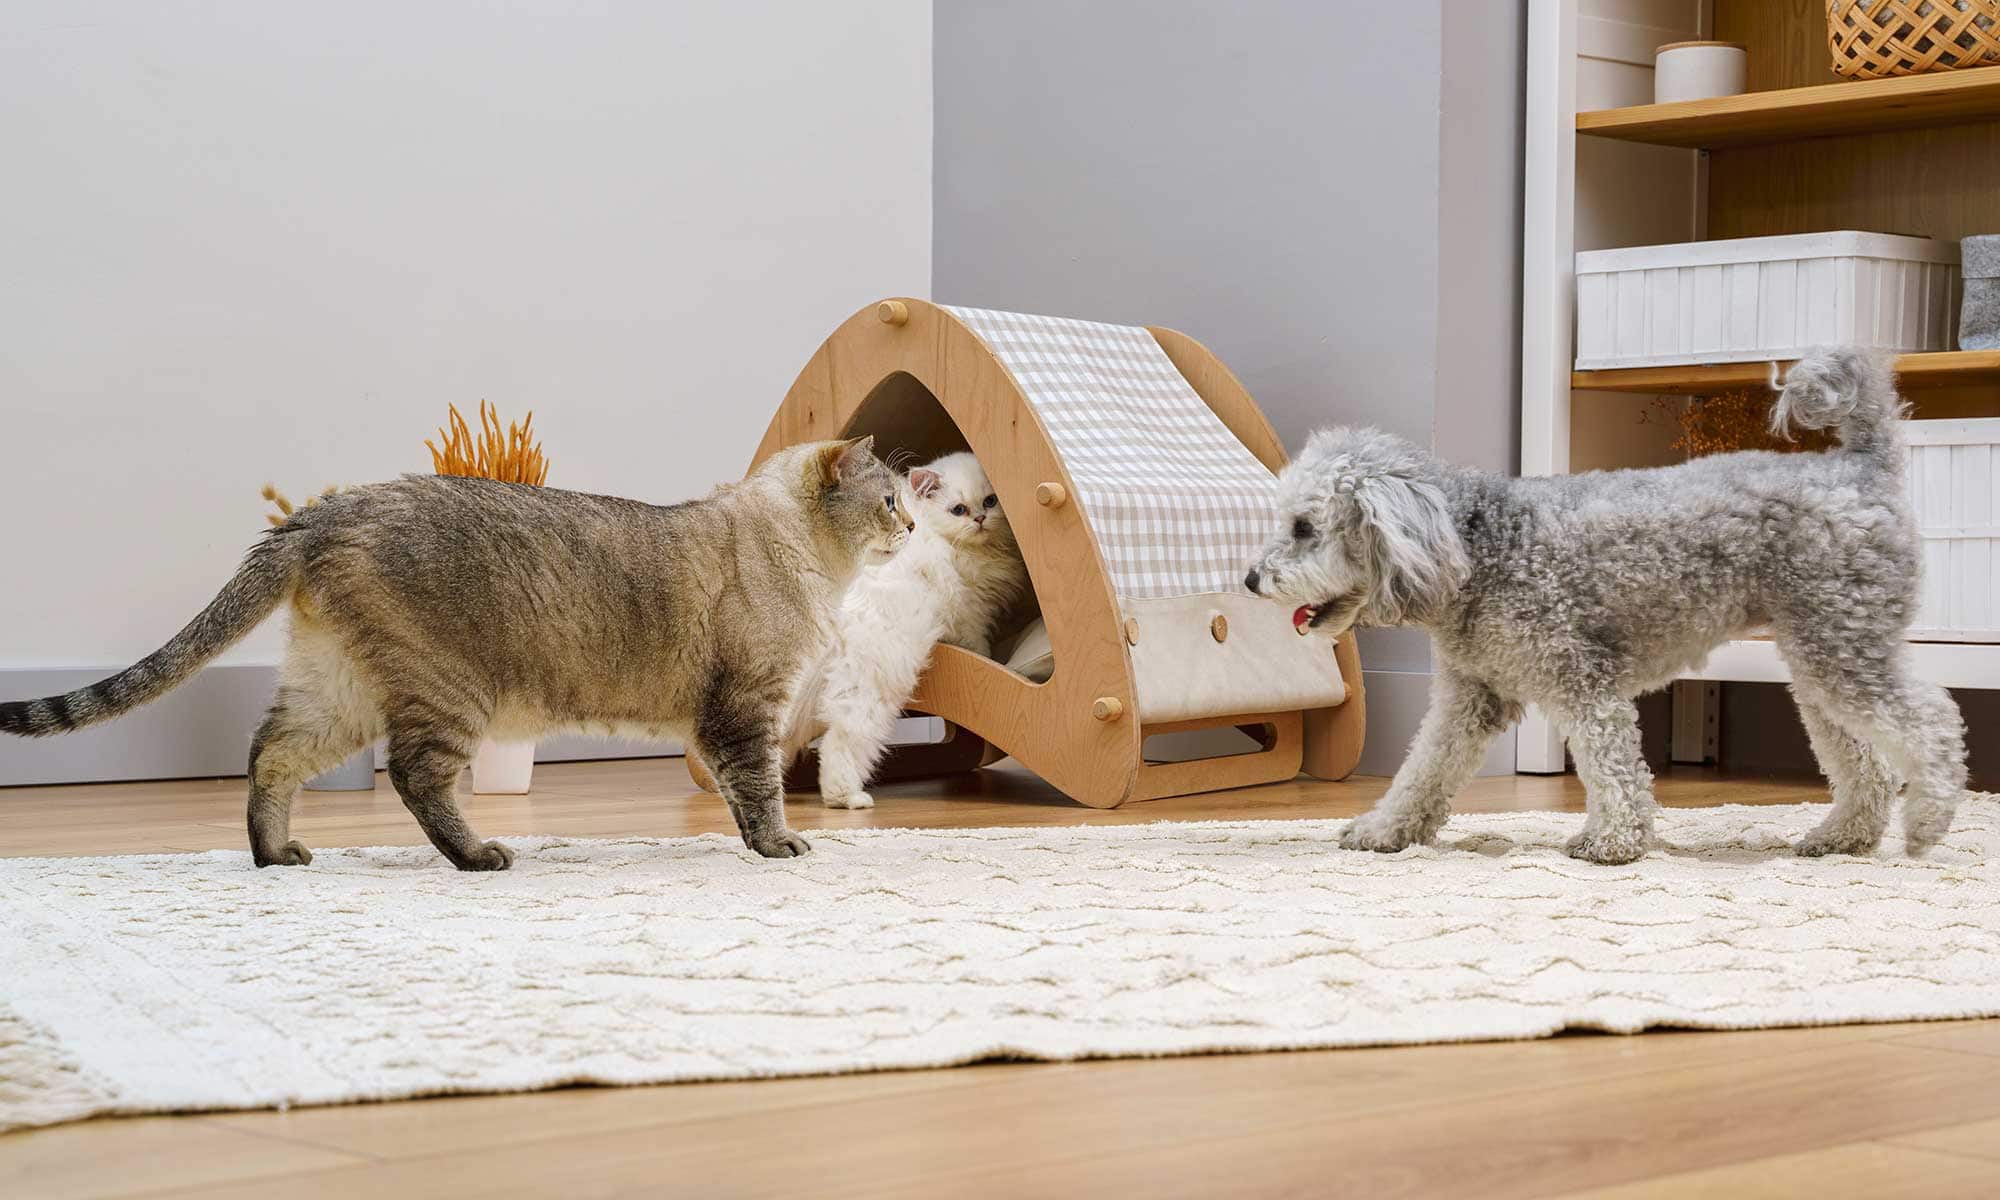 Cats and dogs playing